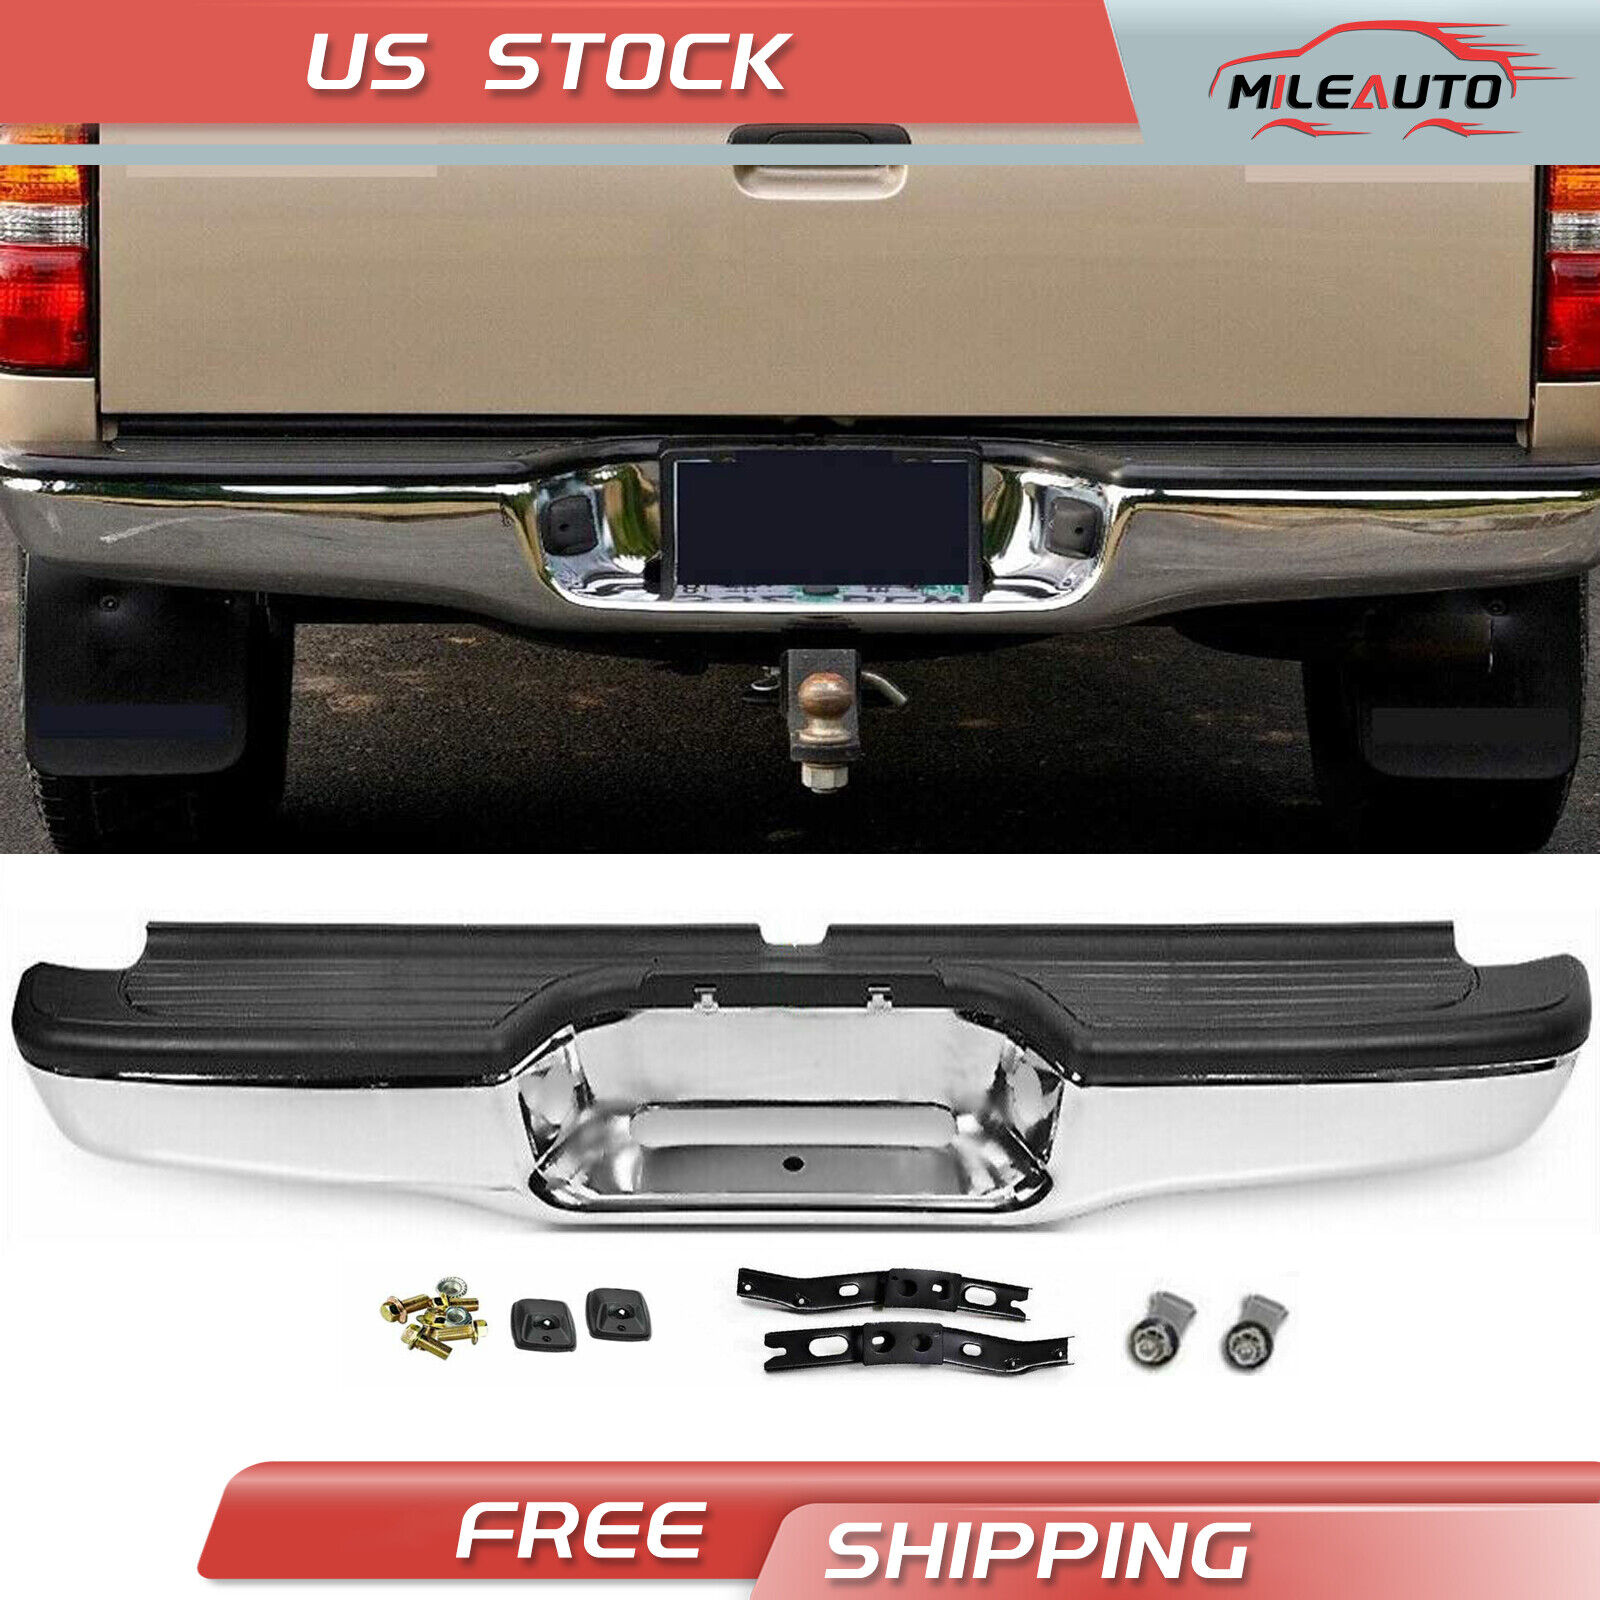 Complete Rear Step Bumper Assembly For 1995-2004 Toyota Tacoma Pickup Truck